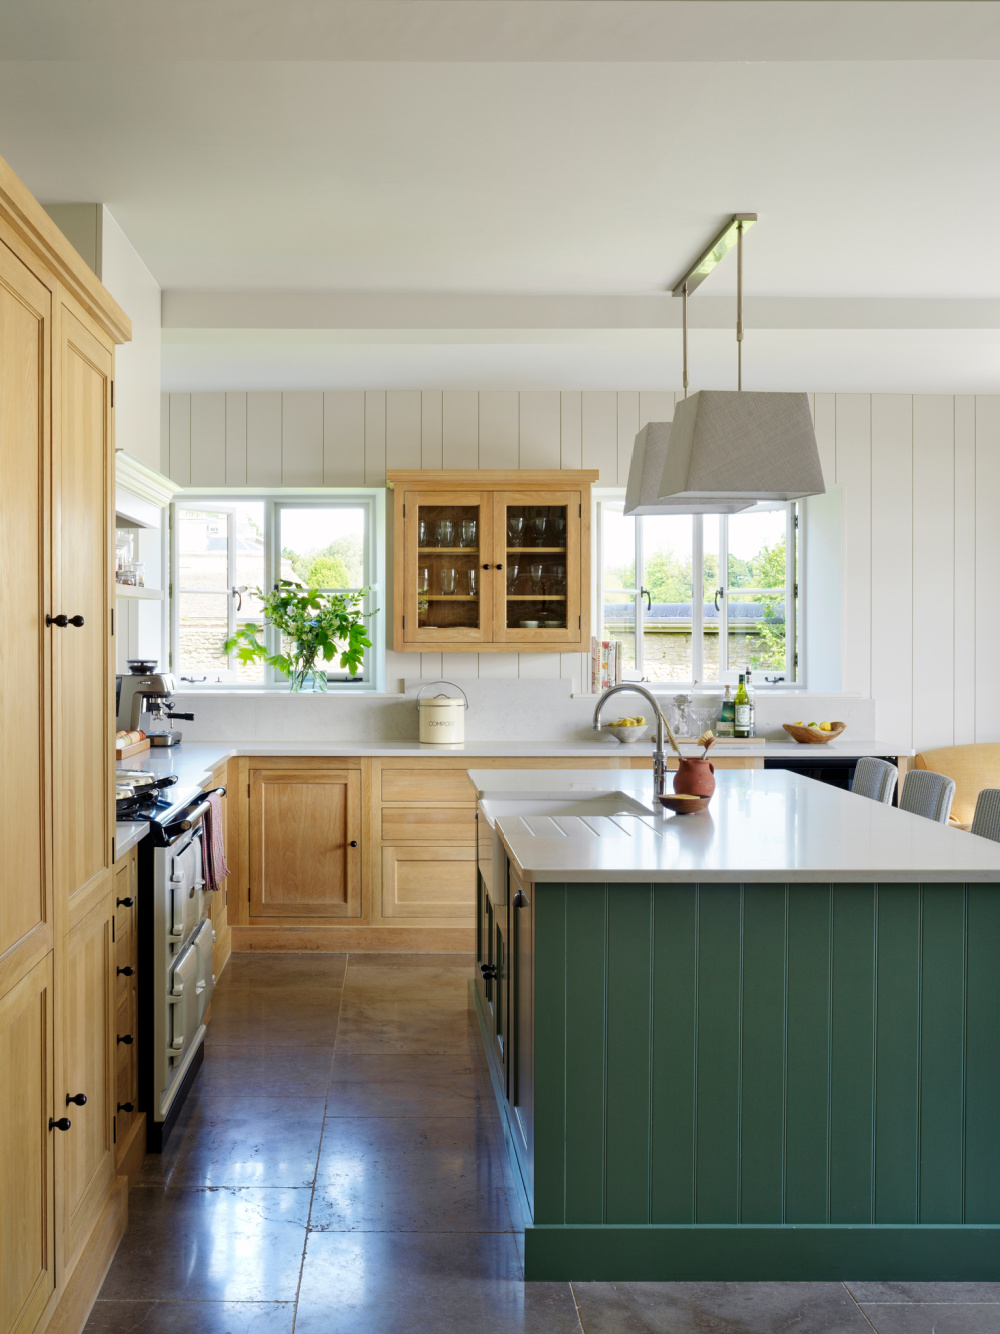 English Country kitchen with green island and design by Sims Hilditch in THE EVOLUTION OF HOME (Rizzoli, 2022).